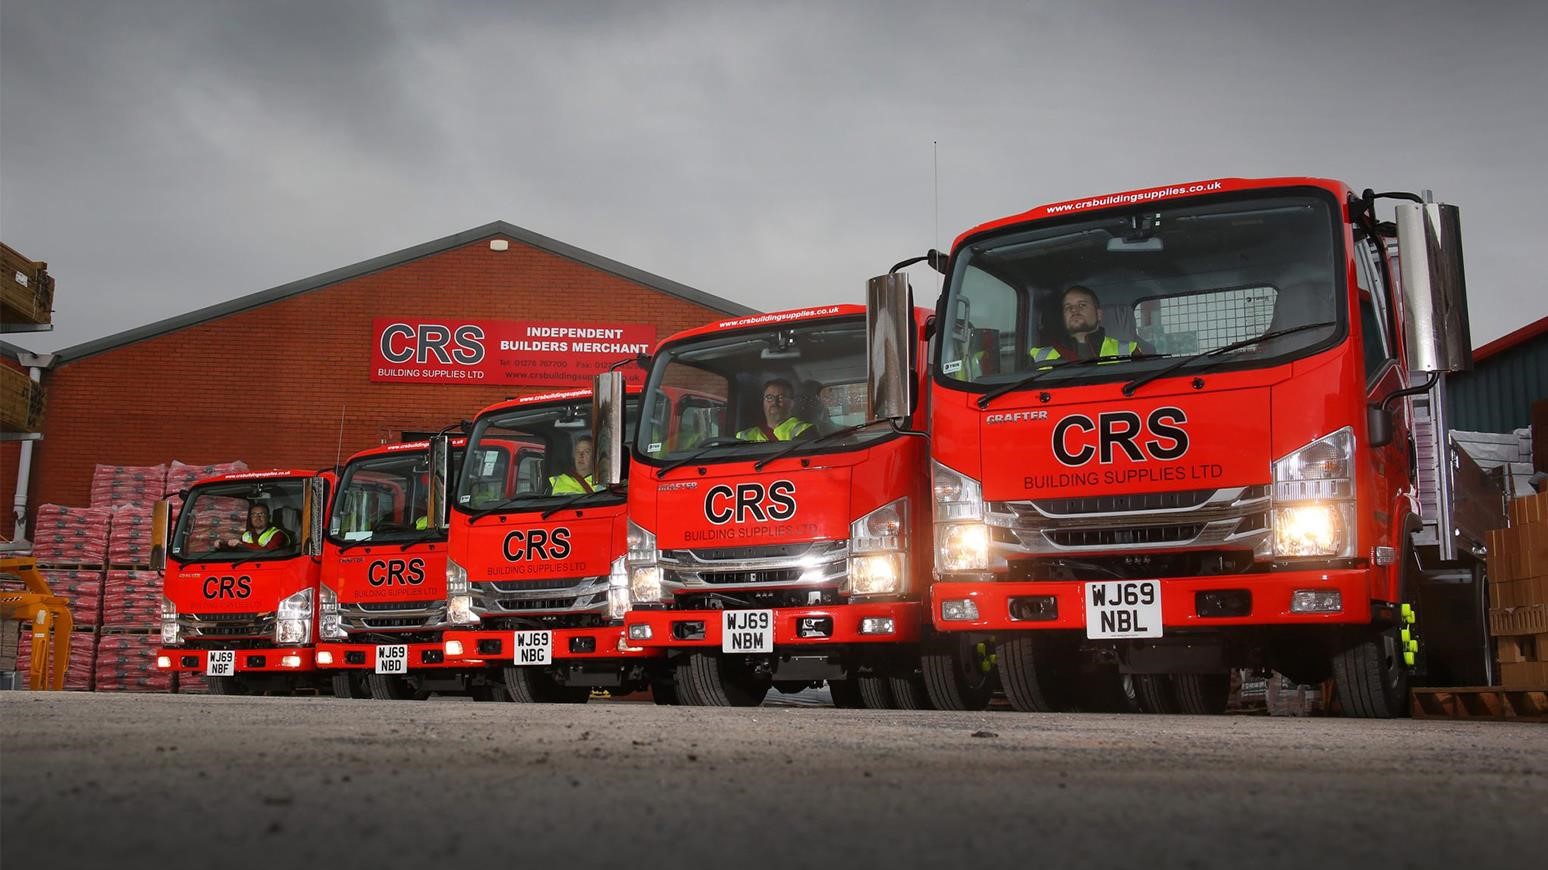 Somerset-Based CRS Building Supplies Replaces Half Of Its 3.5-Tonne Truck Fleet With Seven Isuzu Grafter N35.125 Tippers